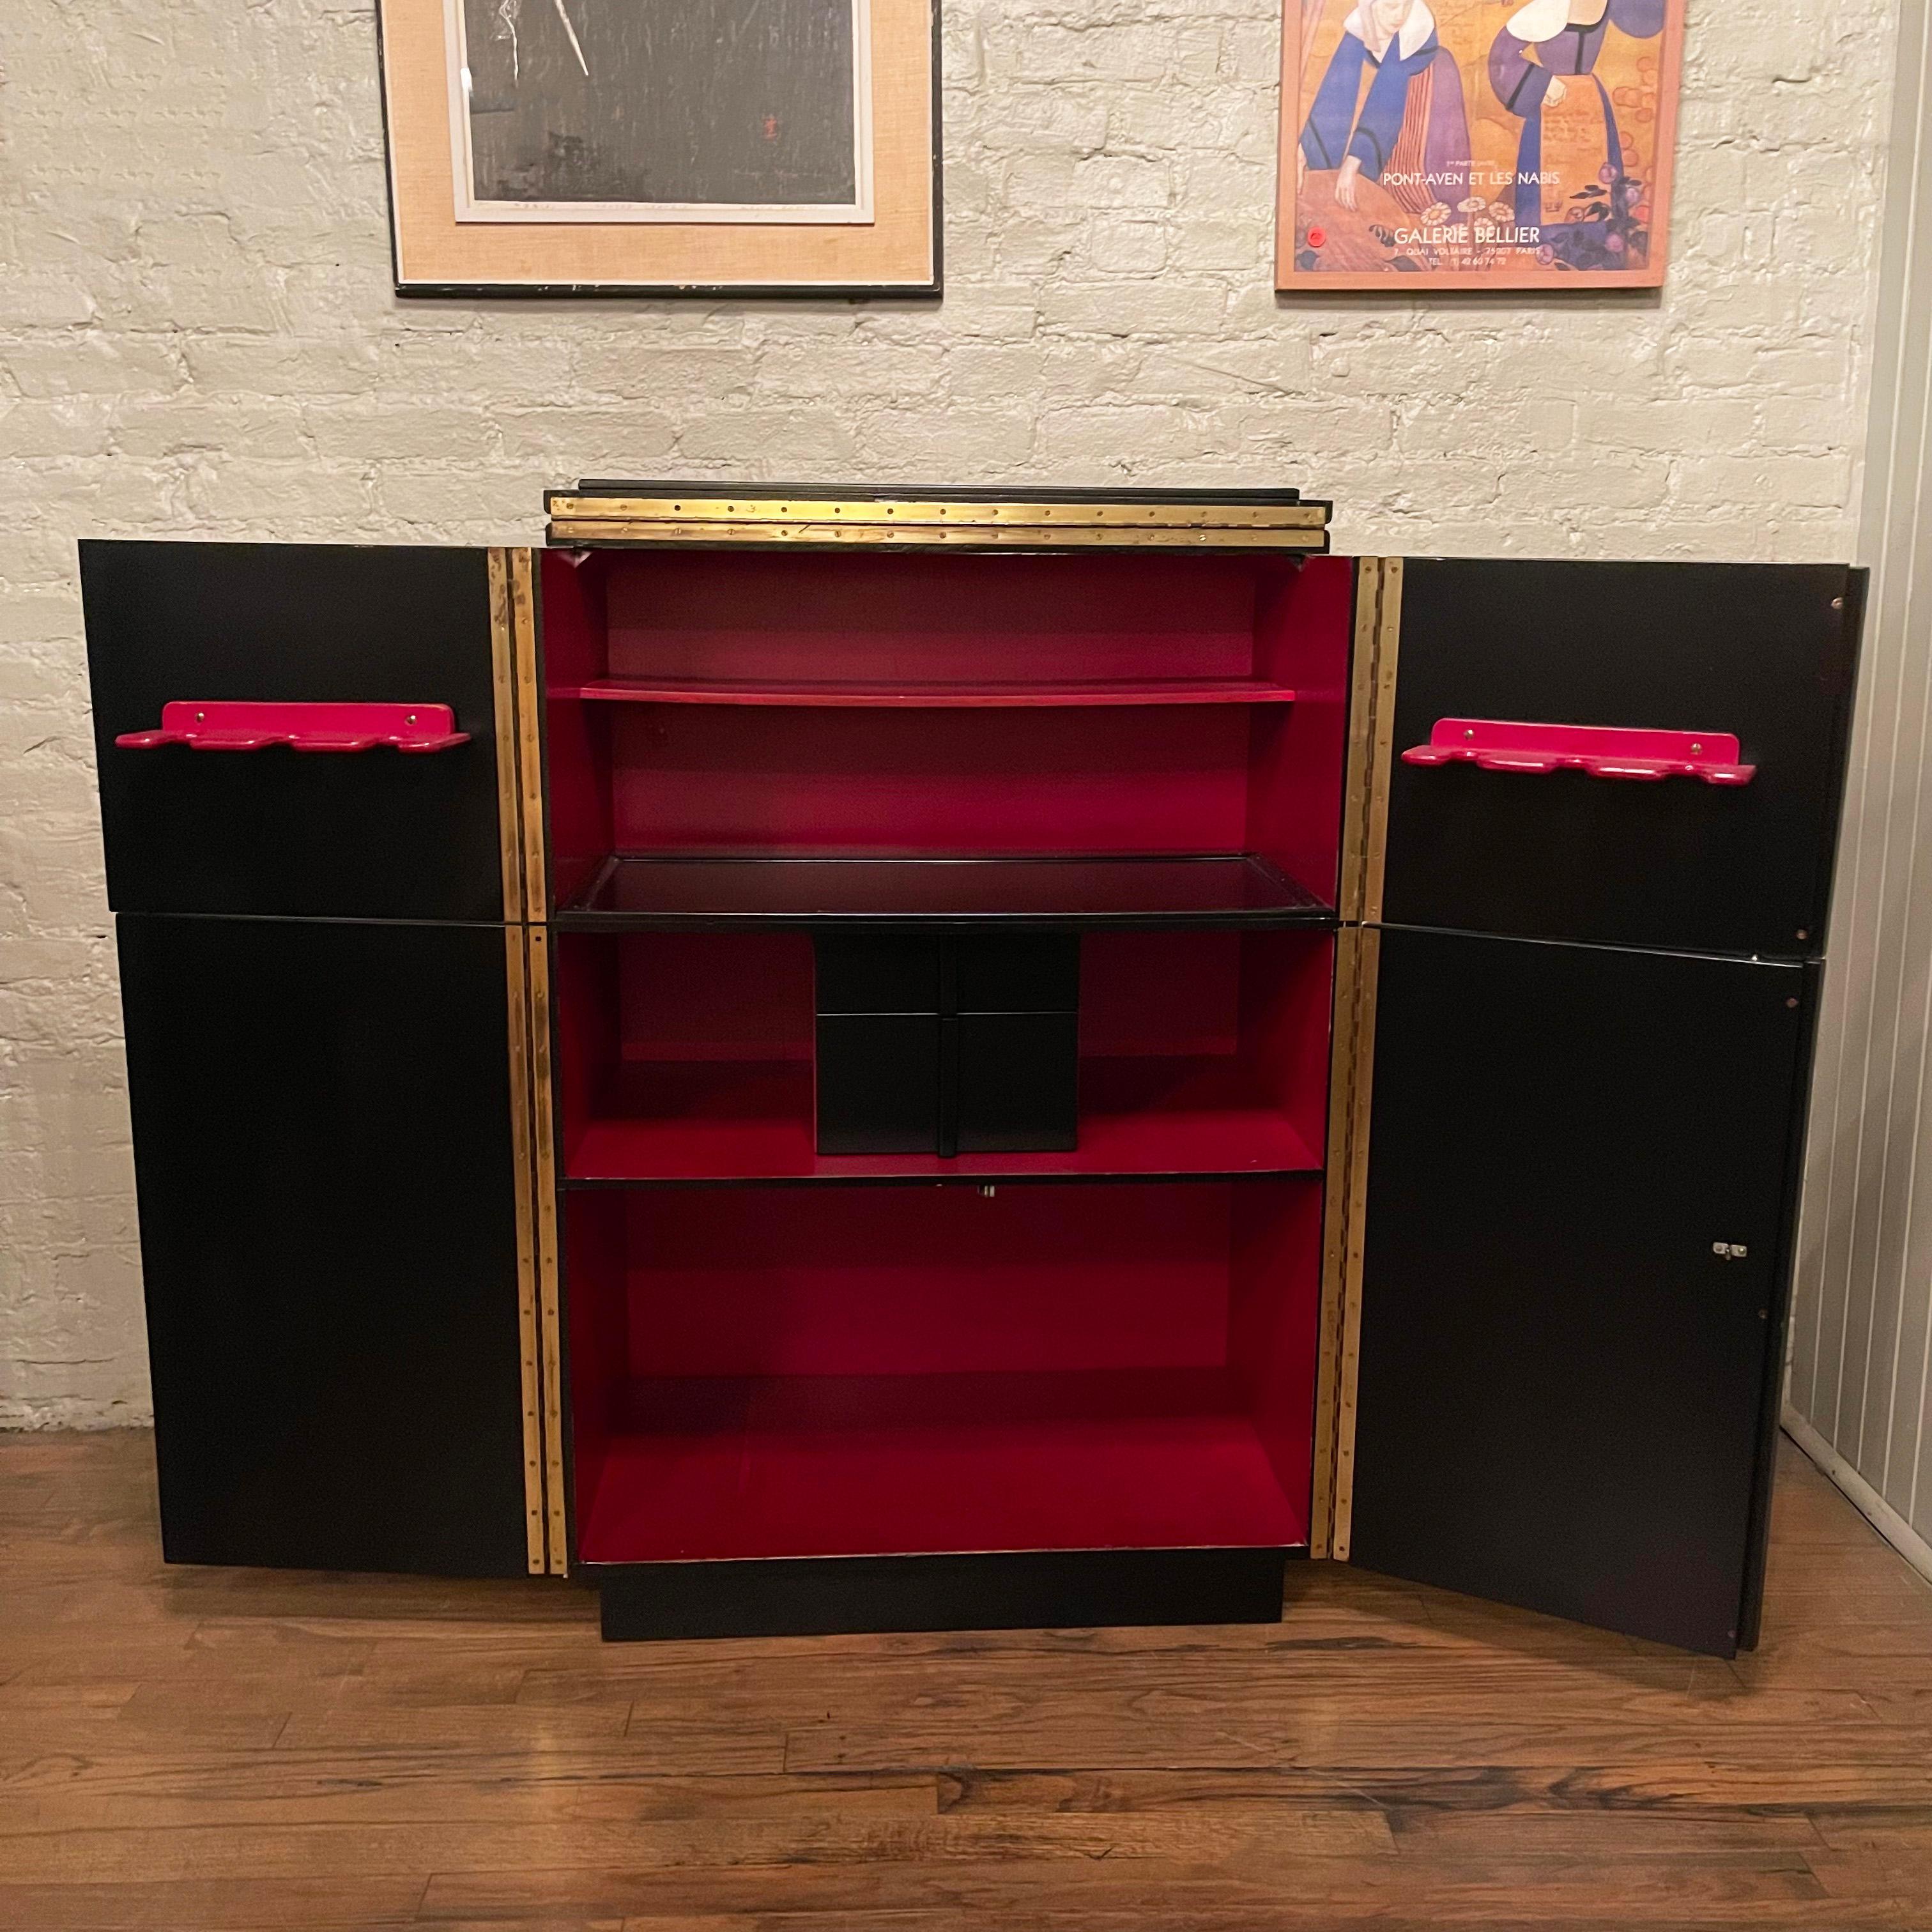 Streamlined, art deco / midcentury, walnut cabinet with a black lacquered exterior opens to a 60 inch wide full bar with contrasting lipstick red interior finish. The interior features open shelves for bottles and glasses, two small drawers, slots